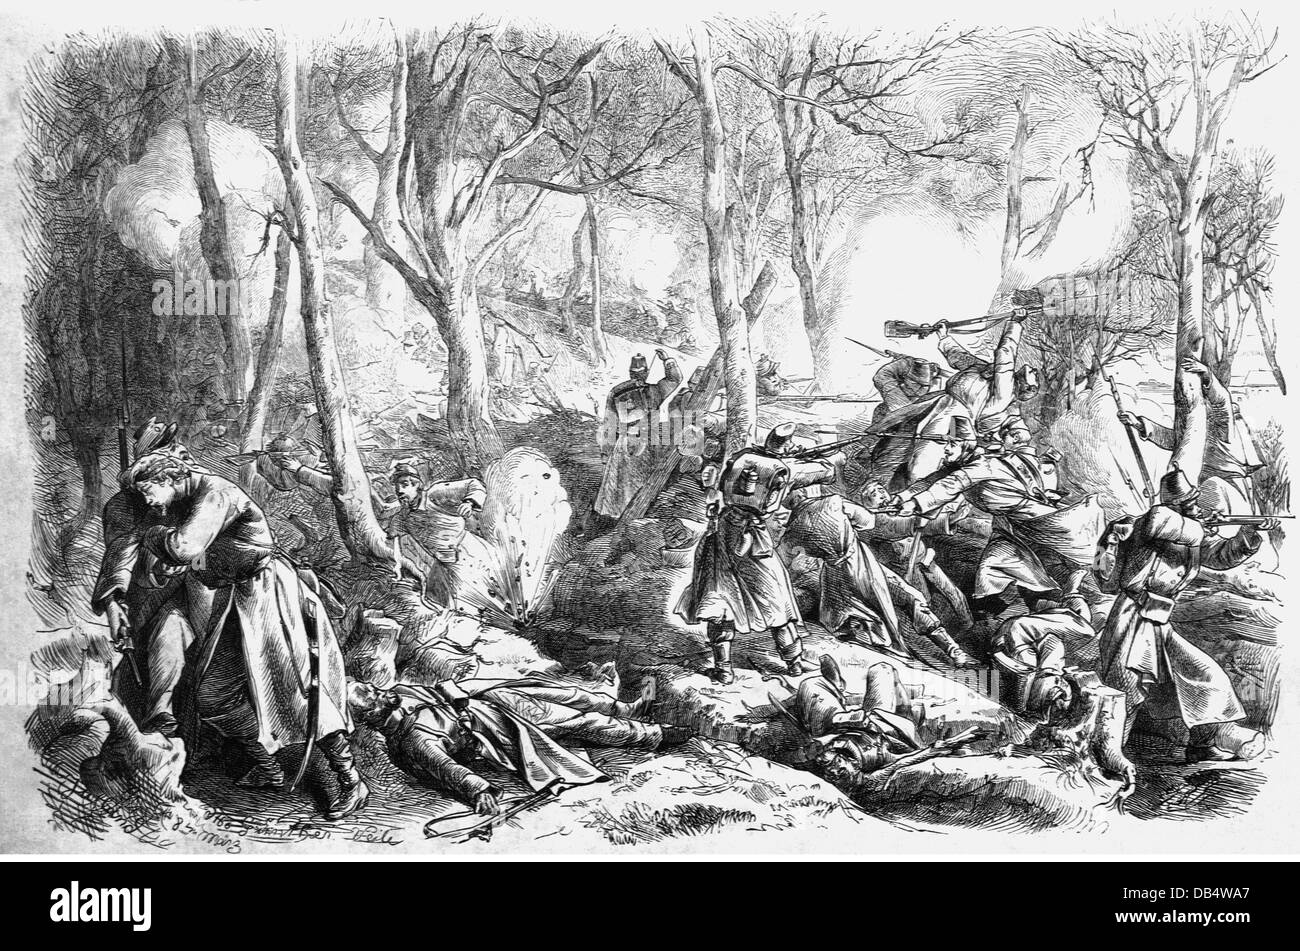 events, Second Schleswig War 1864, skirmish at Vejle, 8.3.1864, Austrian infantry attacking a Danish position, wood engraving after drawing by Otto Guenther, Additional-Rights-Clearences-Not Available Stock Photo